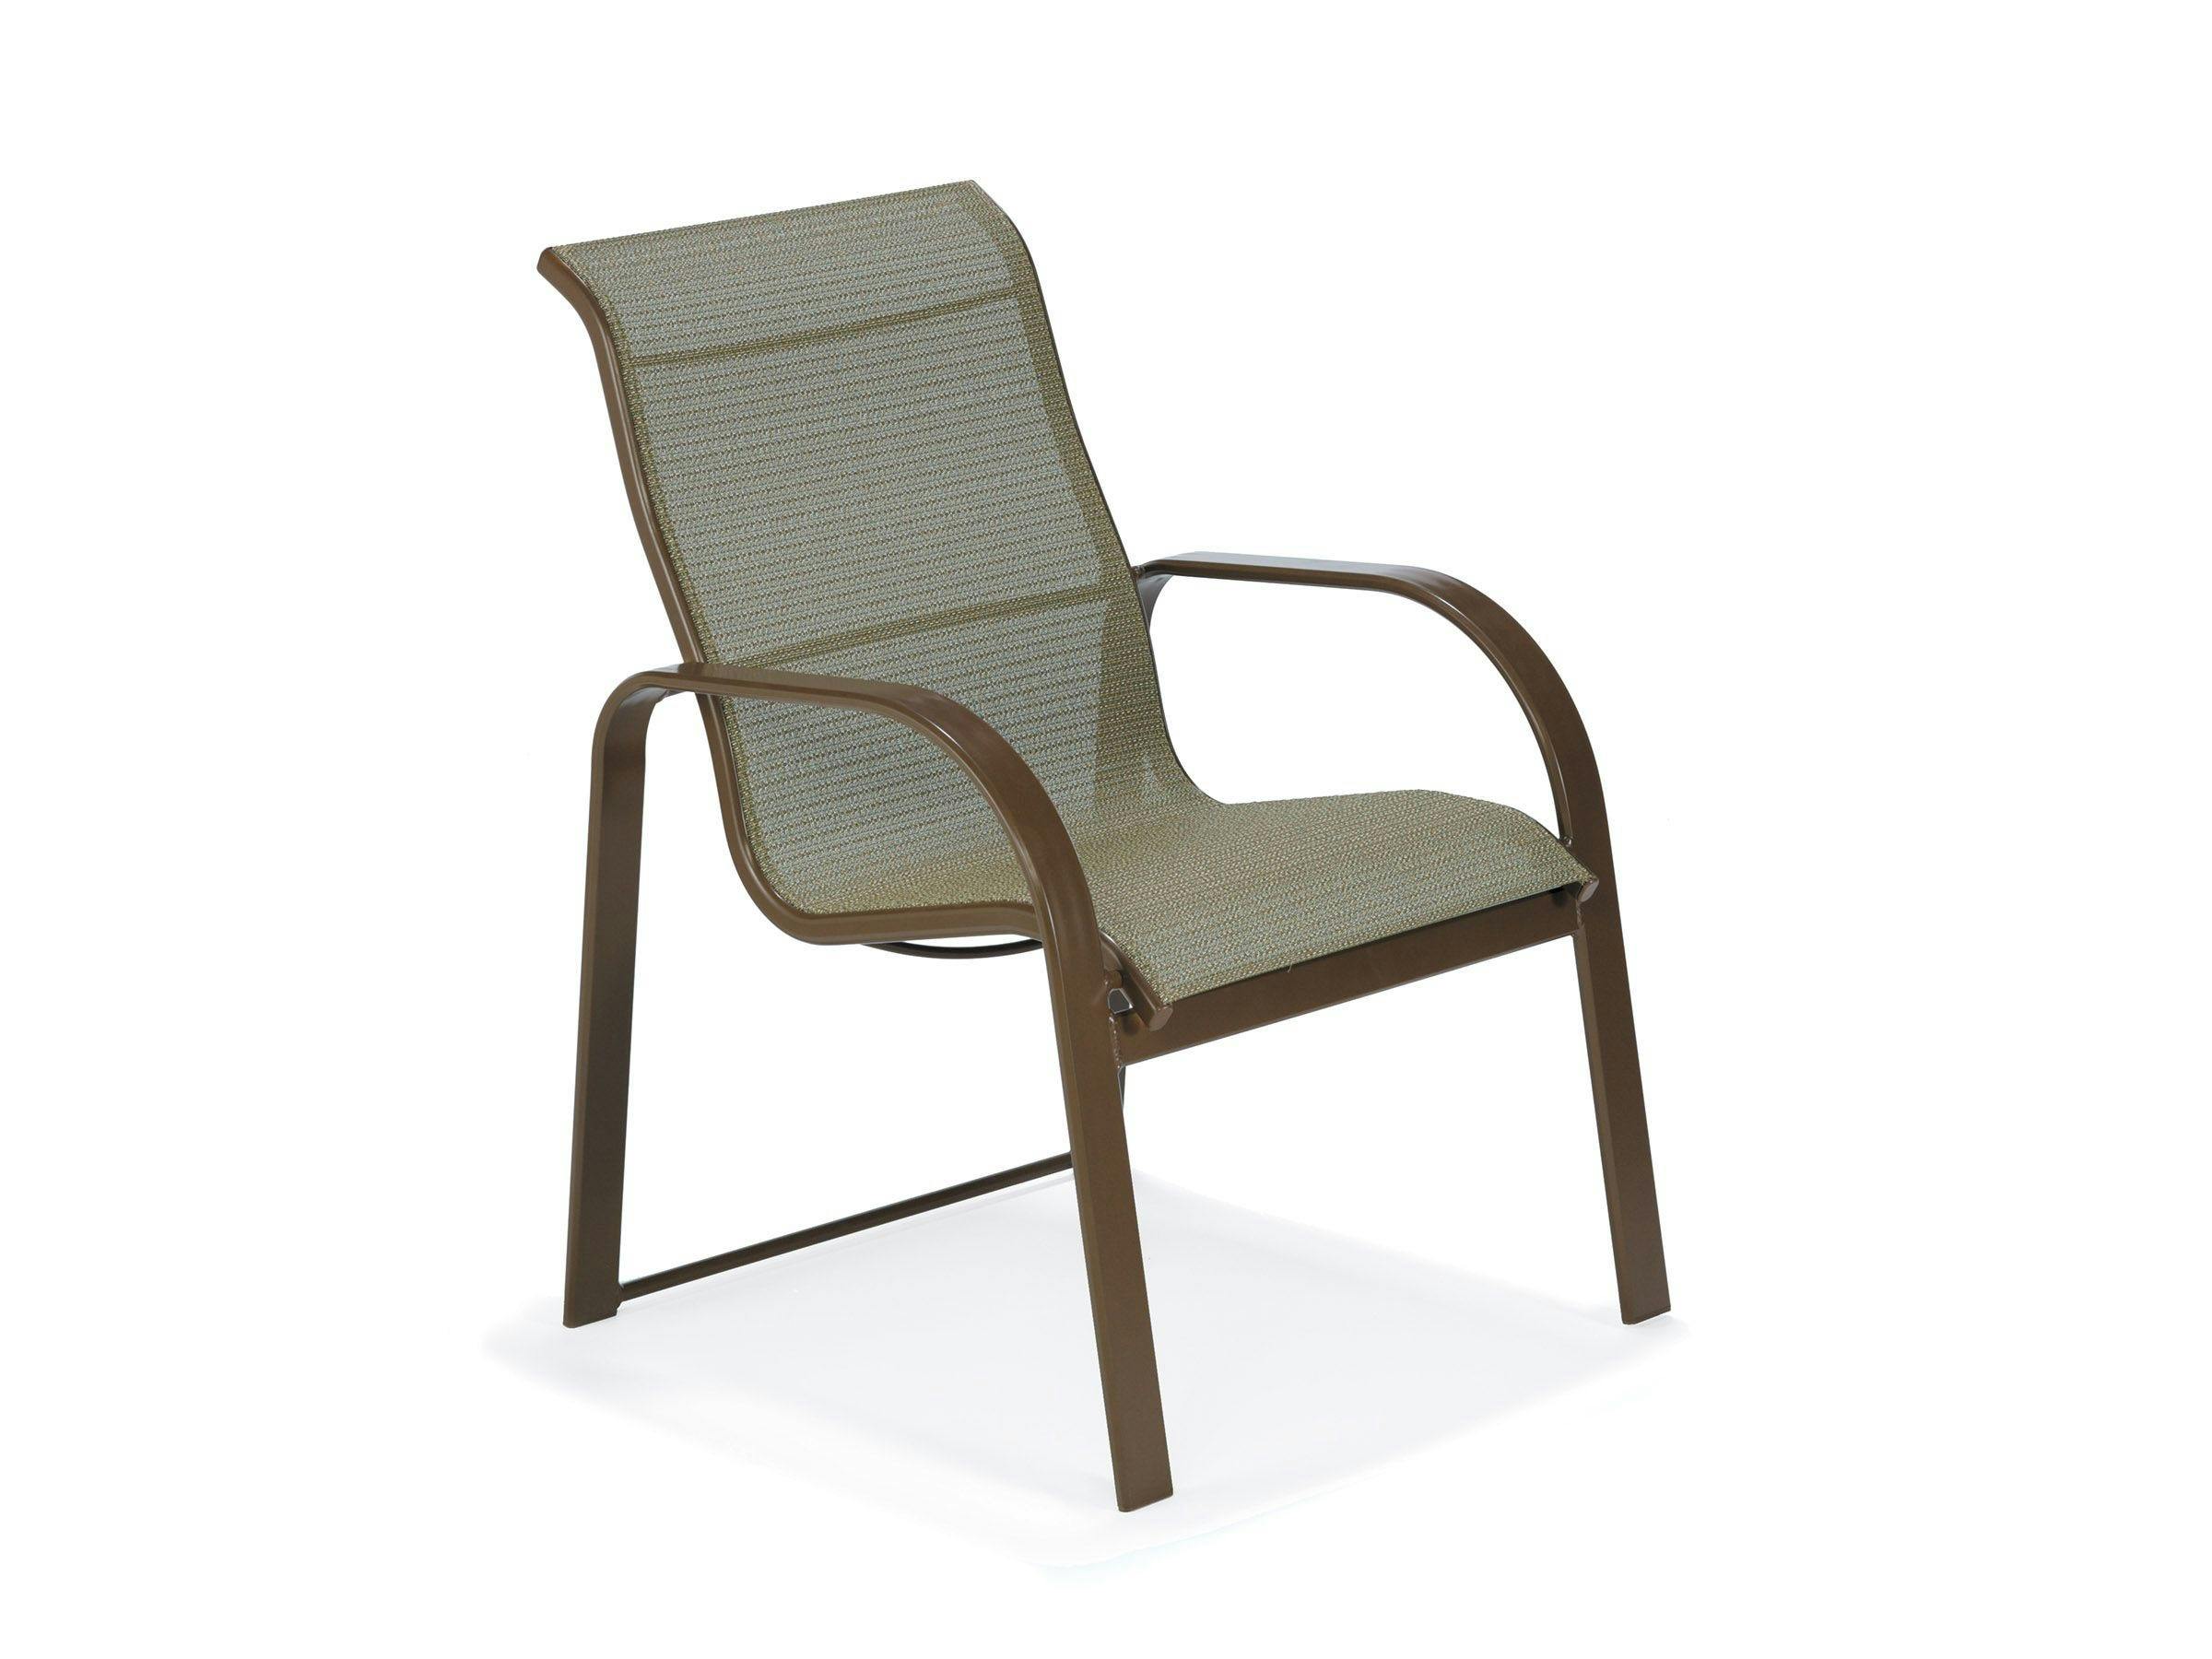 Seagrove II Sling High Back Dining Chair